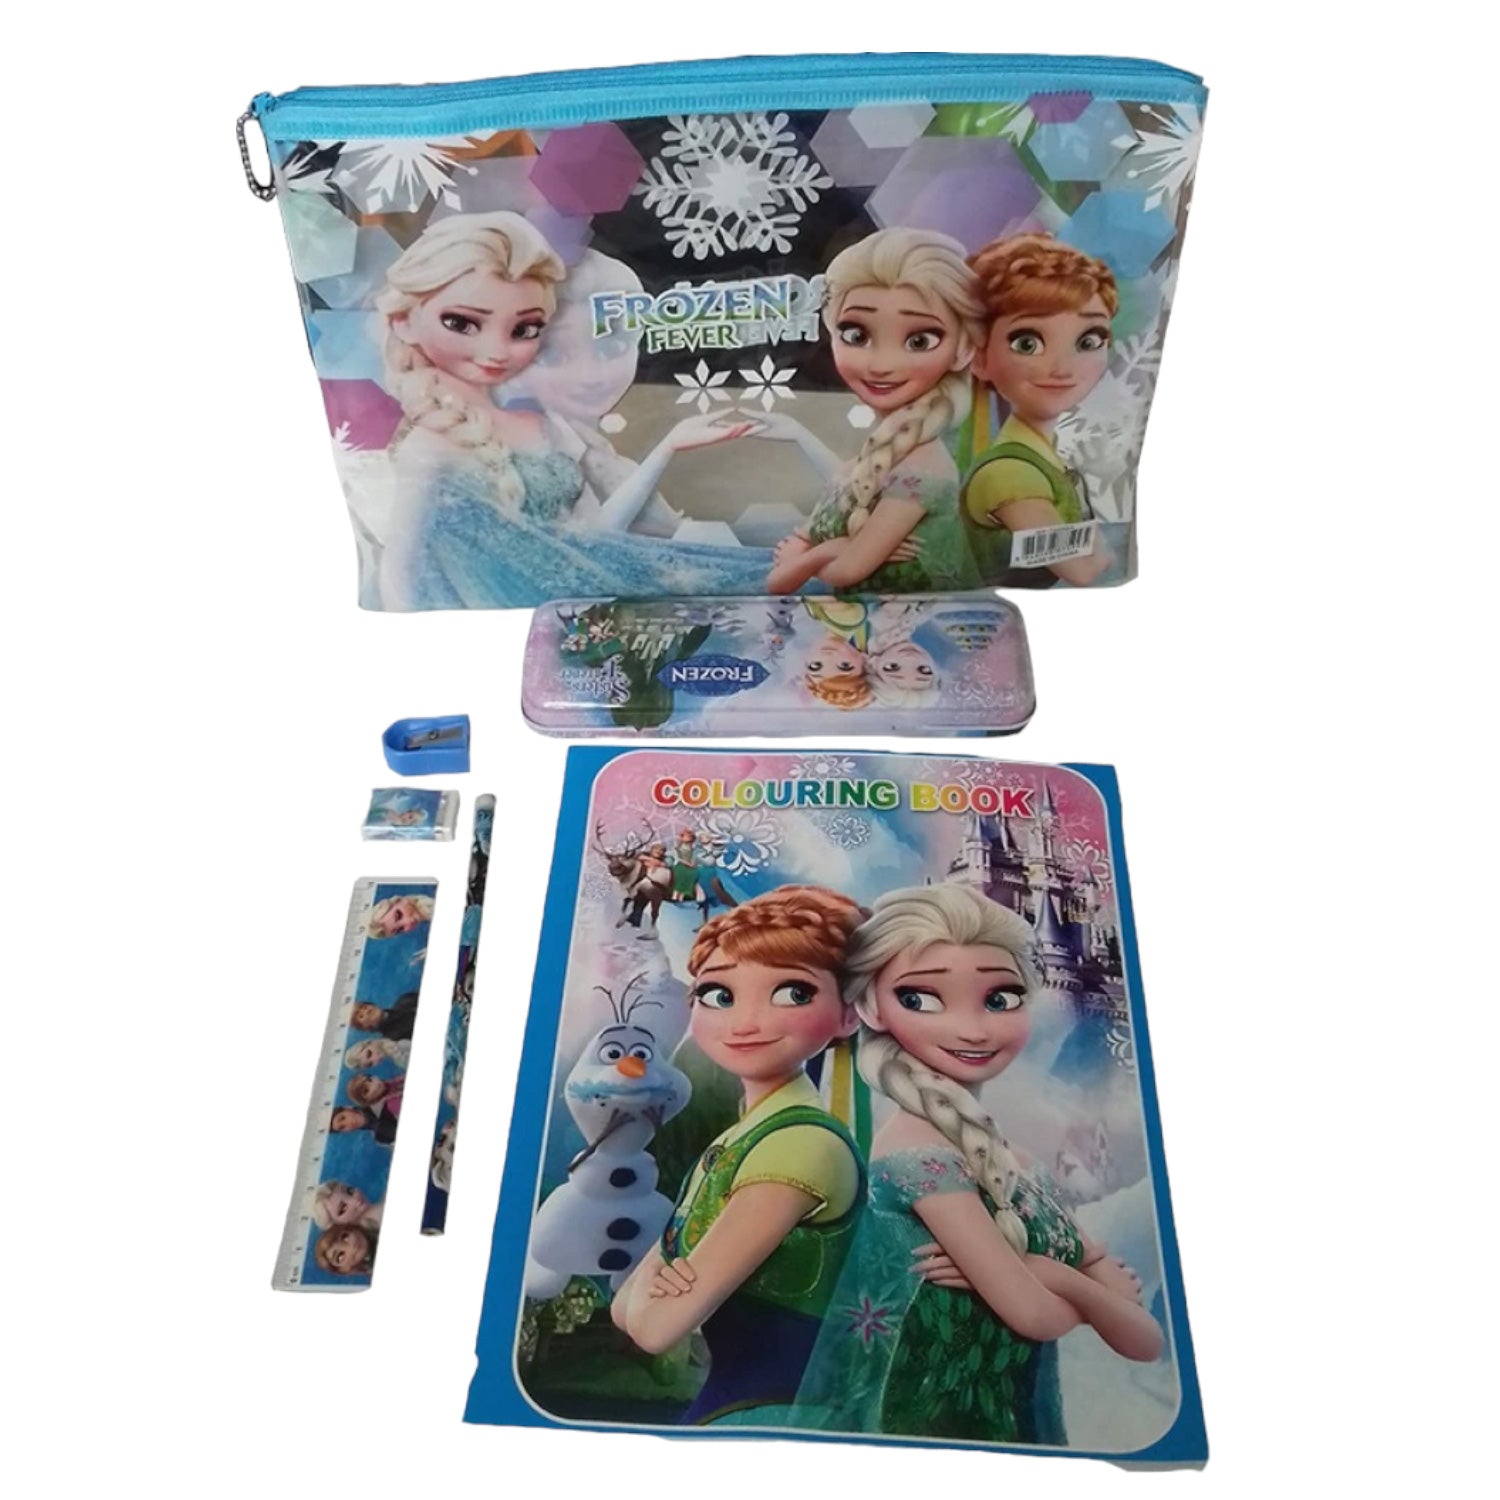 Stationery Kit | Pencil Pouch With Pencil Box, Pencil, Eraser, Sharpner, Scale & Colouring Book - Elsa Anna Design | Pen Pencil Case - for Kids School Supplies & Birthday Return Gifts - Apkamart 